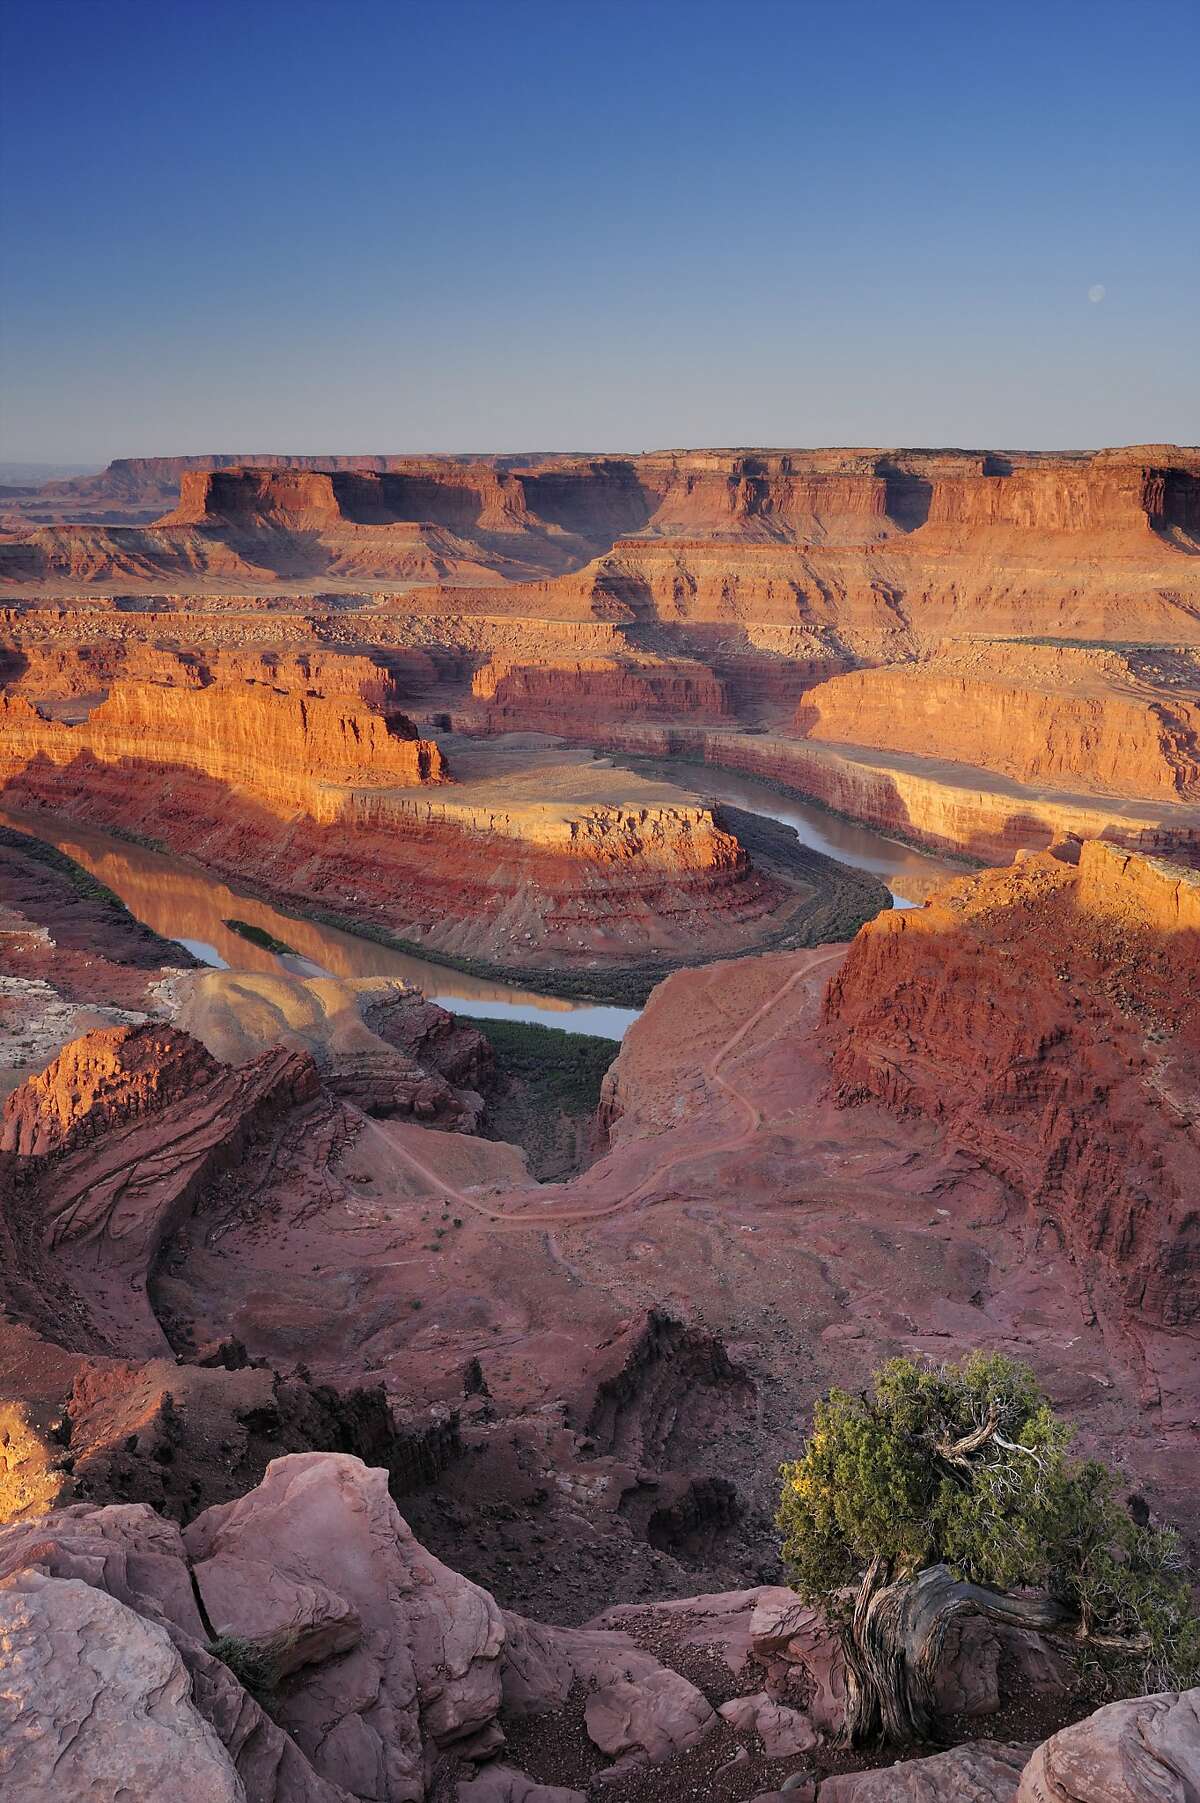 Sunrise at Dead Horse Point in Canyonlands National Park with view to Colorado River.